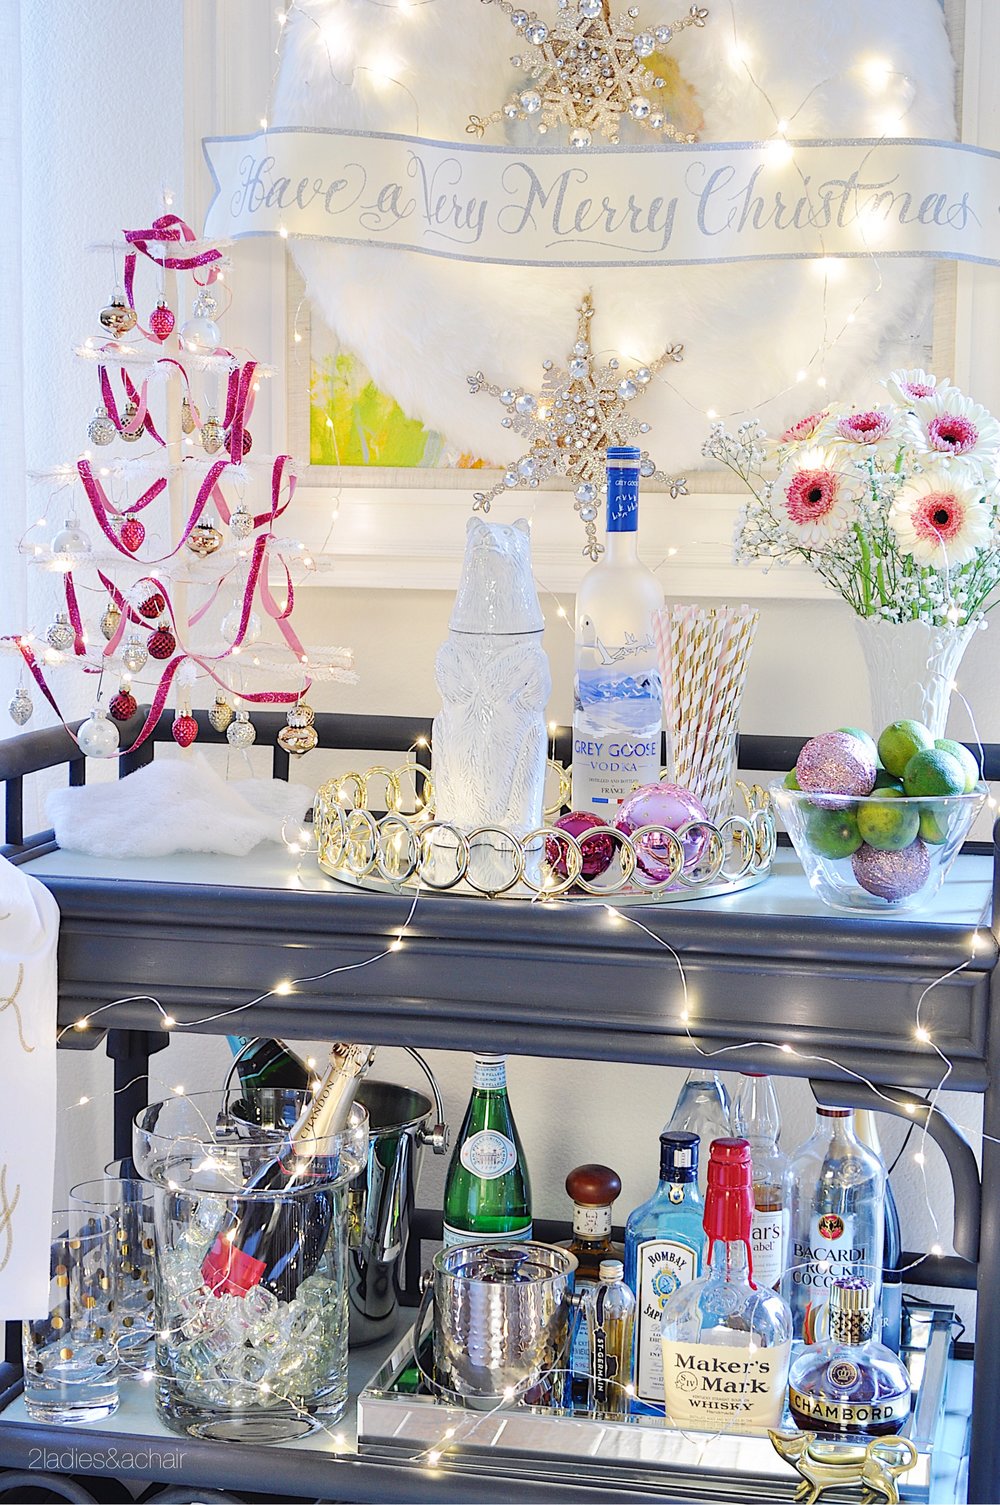 Bring the House Down and Cosy Up Your Christmas Party This Year - Image From 2ladiesandachair.com